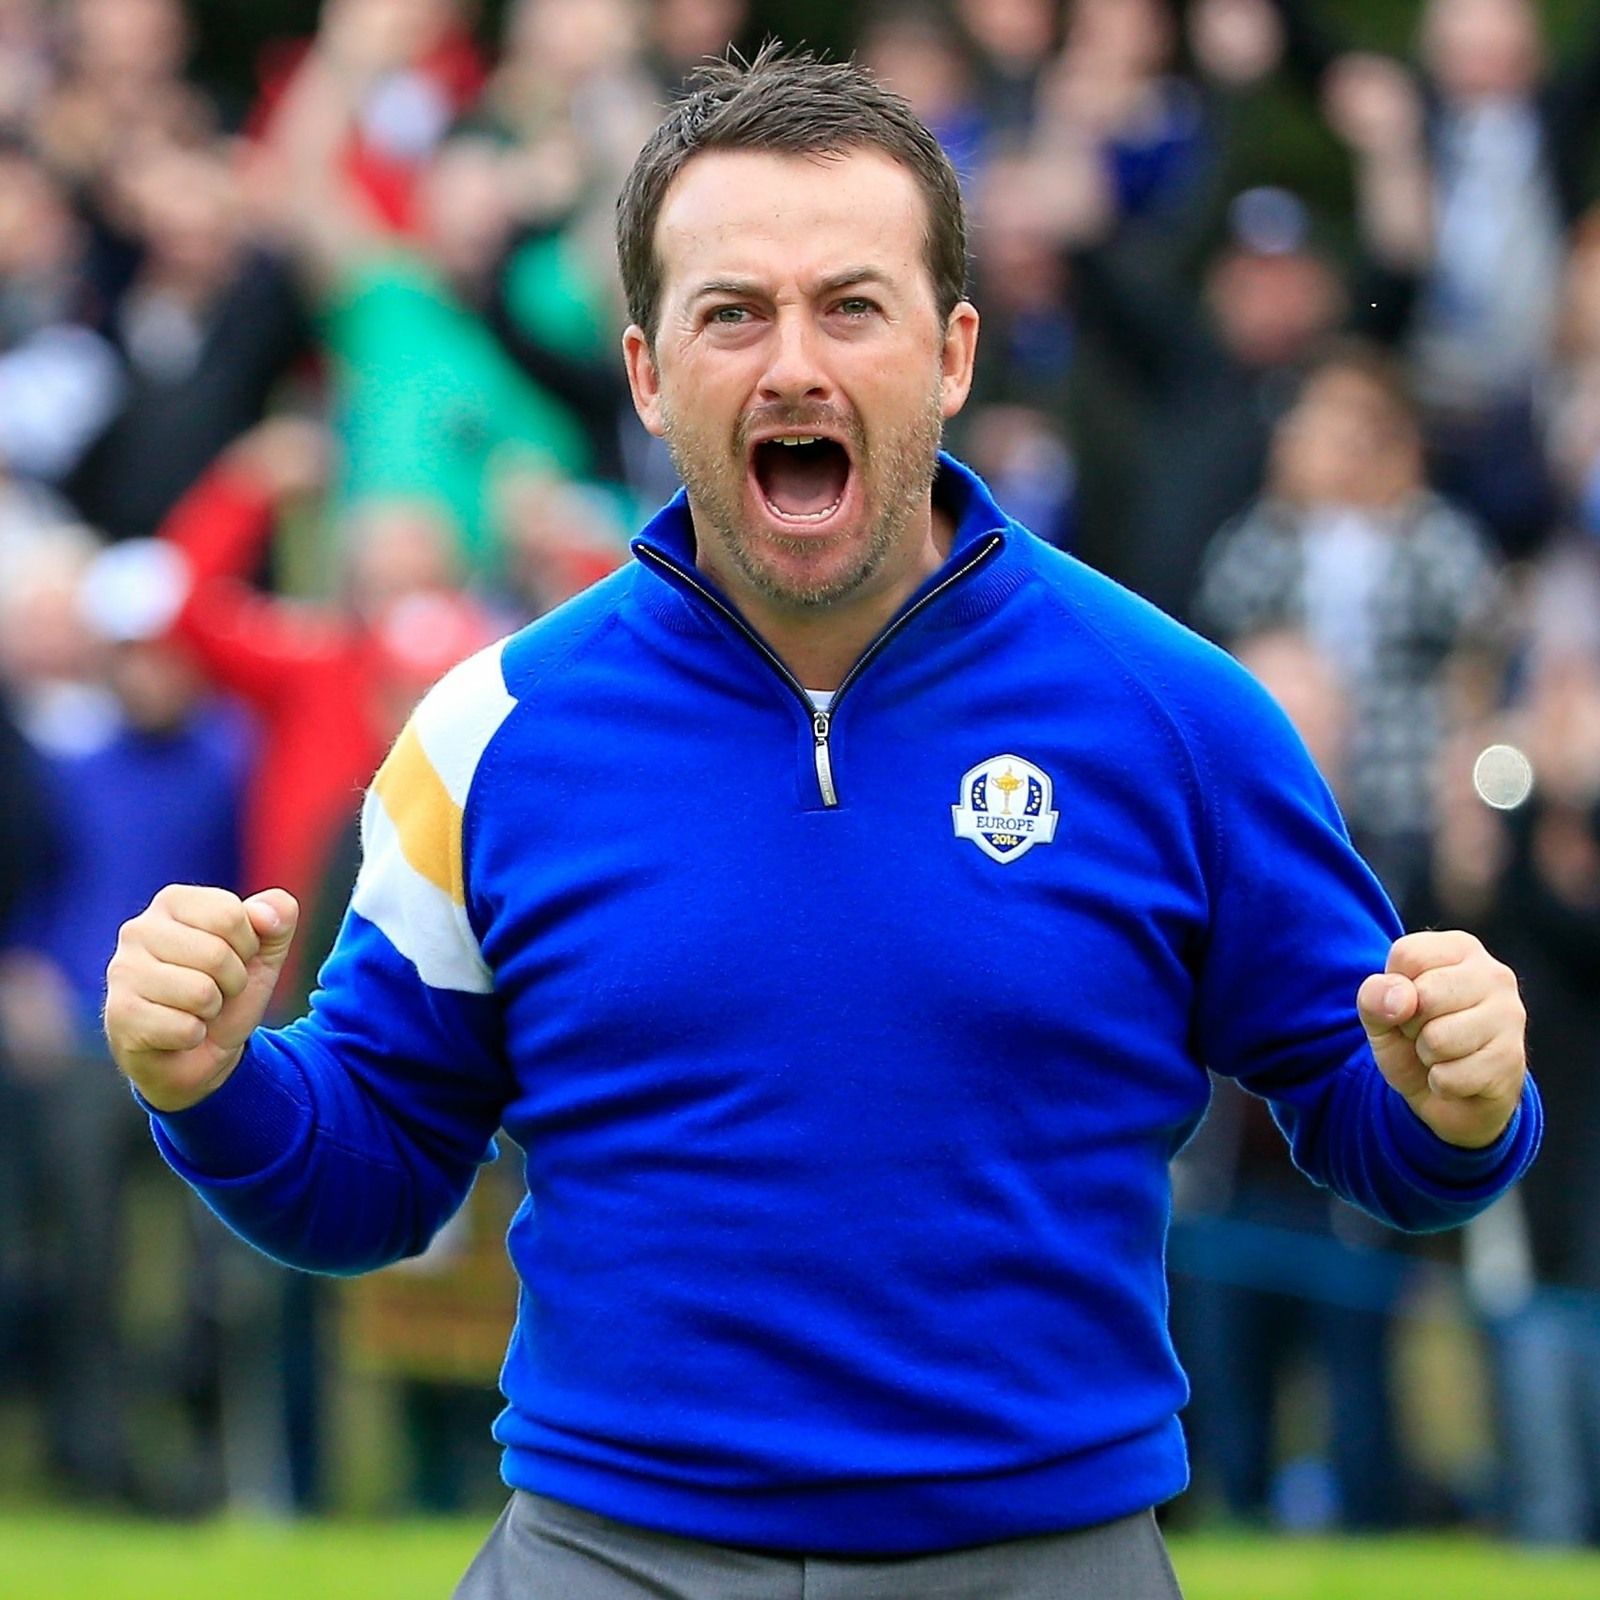 Graeme McDowell: Ryder Cup My Top Goal Of 2020